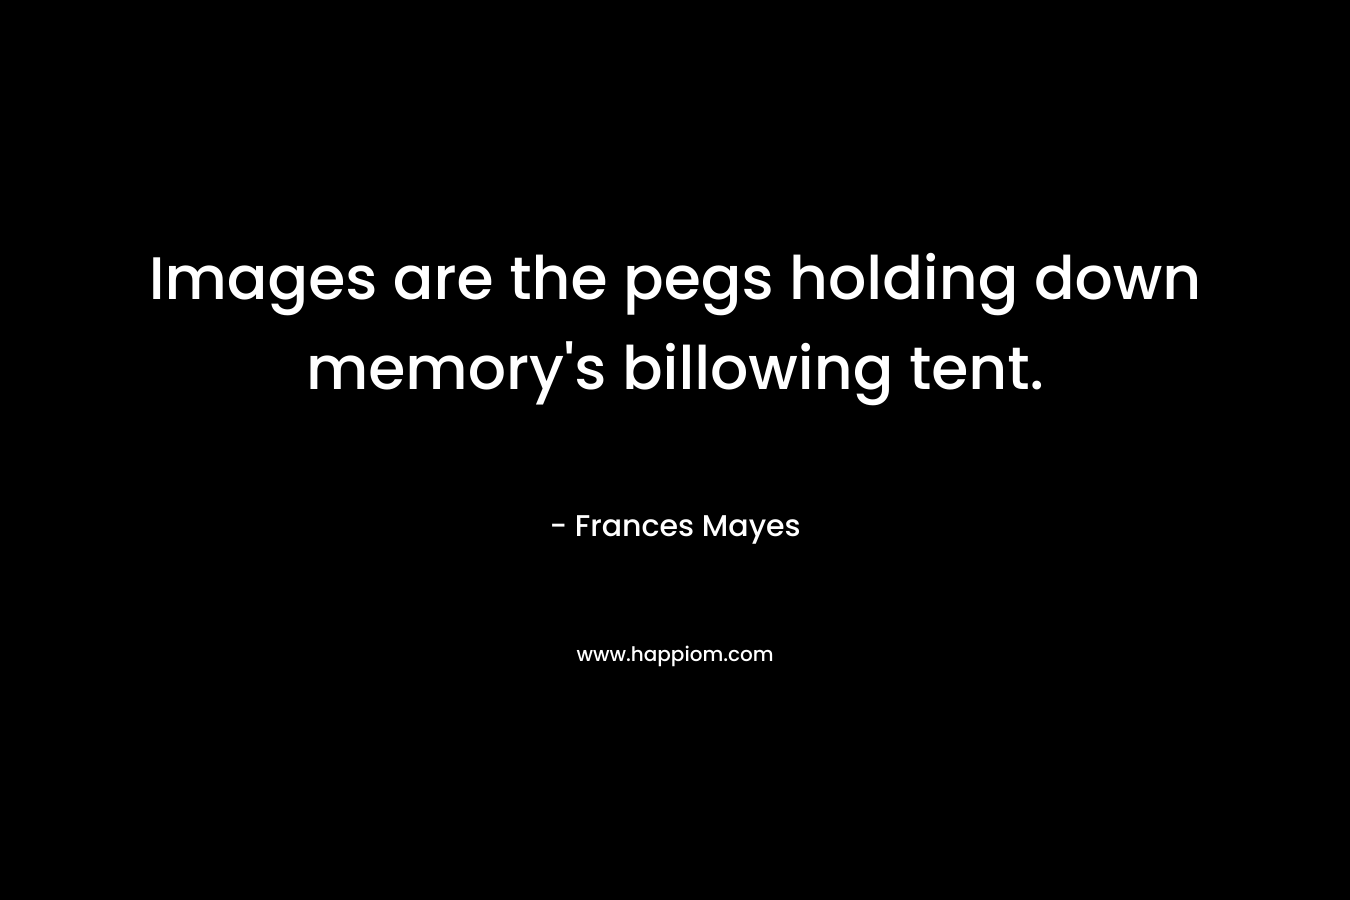 Images are the pegs holding down memory's billowing tent.